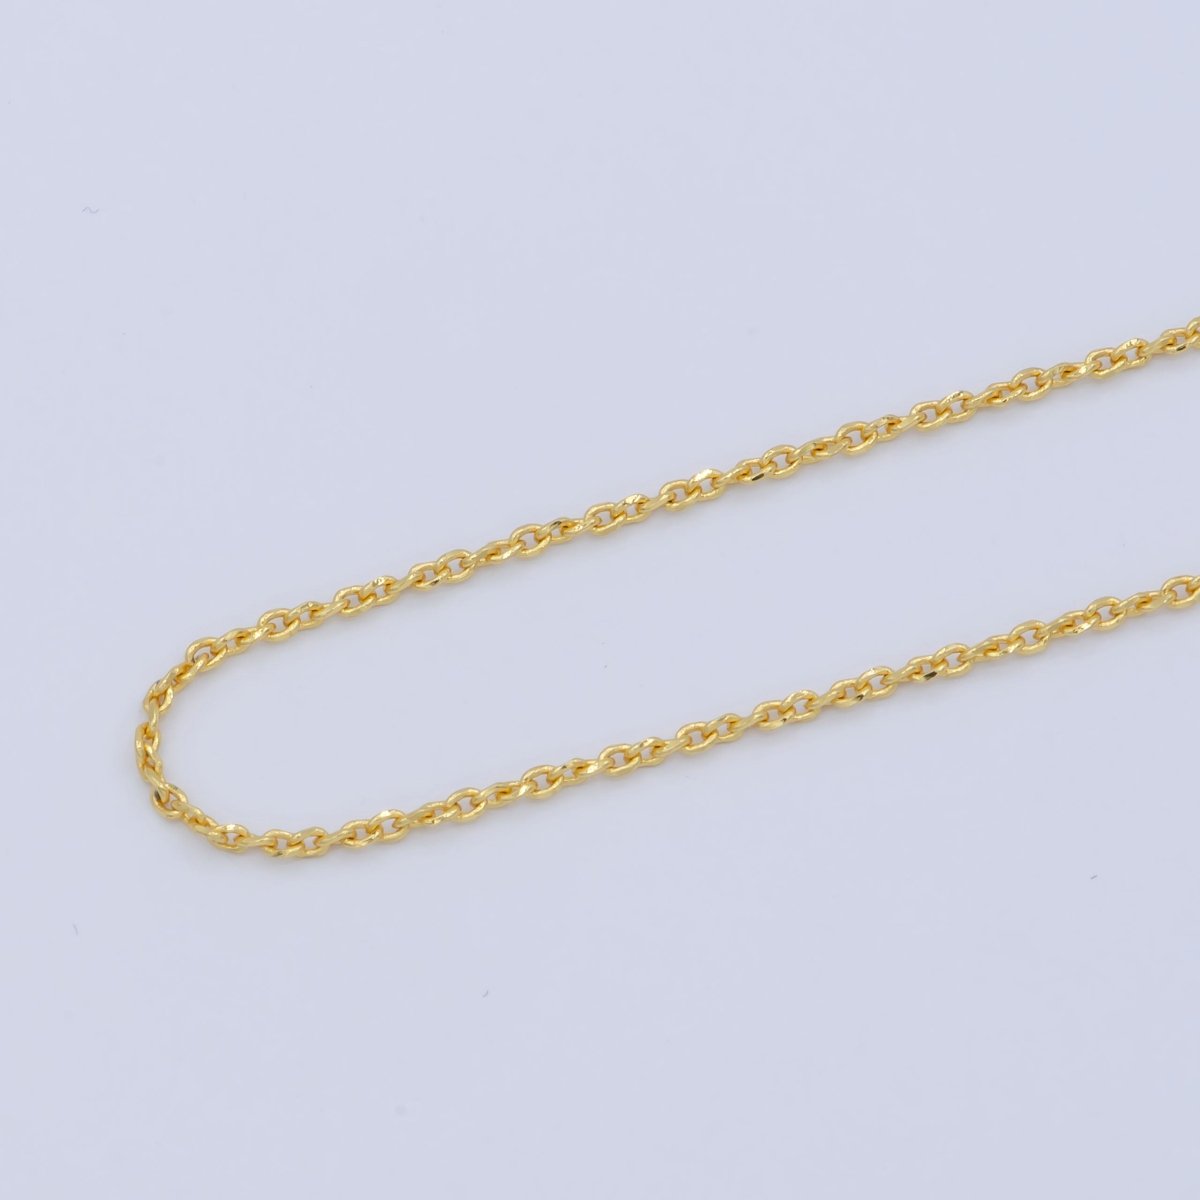 24K Gold Filled 1mm Dainty Twisted Unique Cable Link 18 Inch Layering Chain Necklace | WA-196 Clearance Pricing - DLUXCA